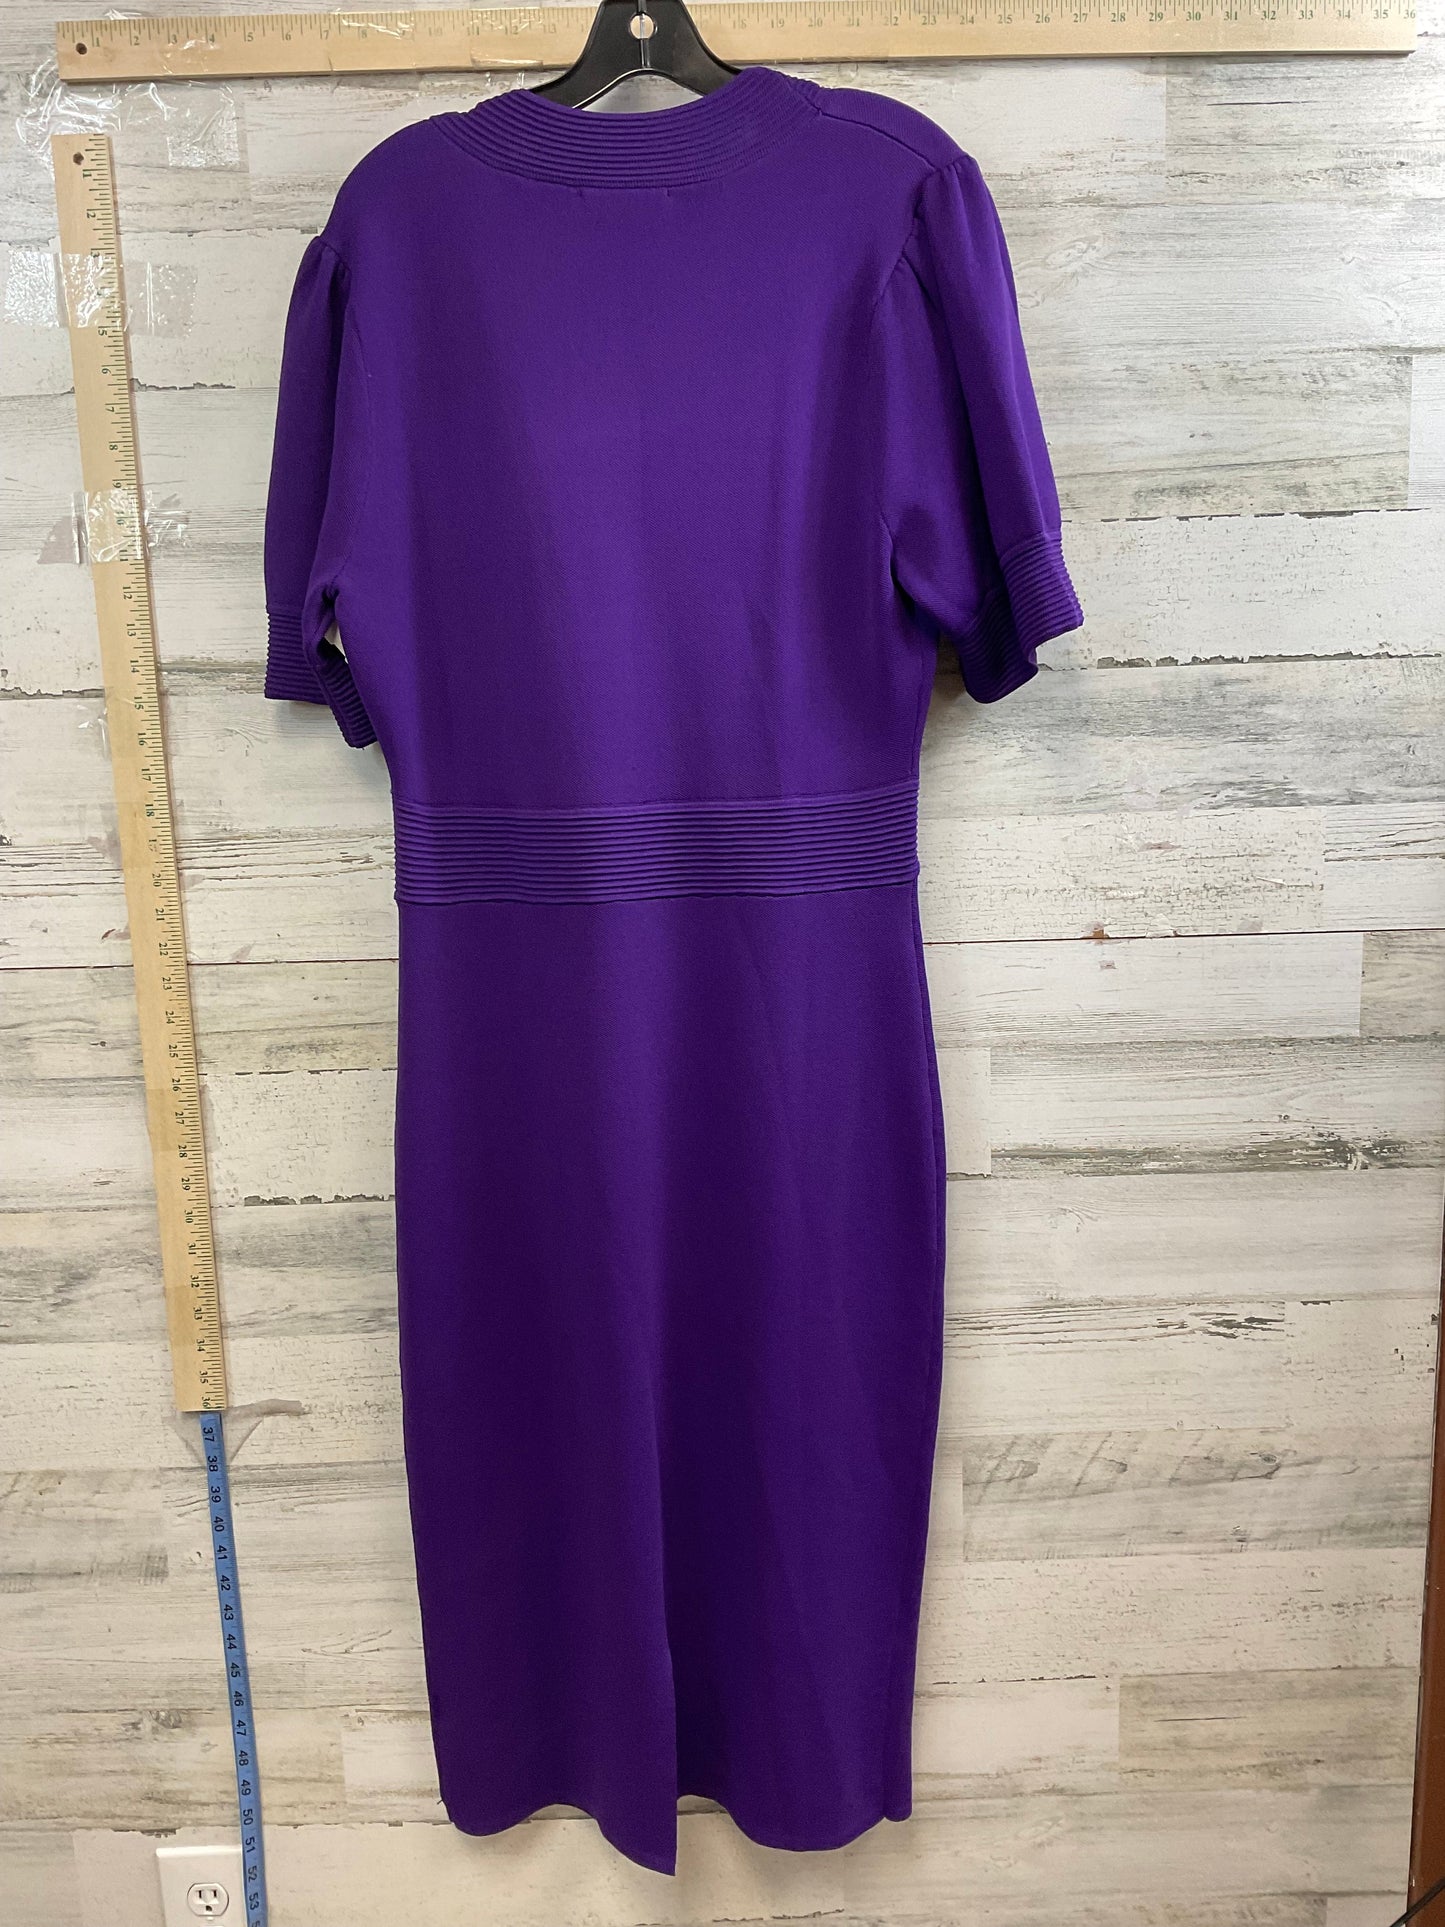 Purple Dress Sweater New York And Co, Size Xl